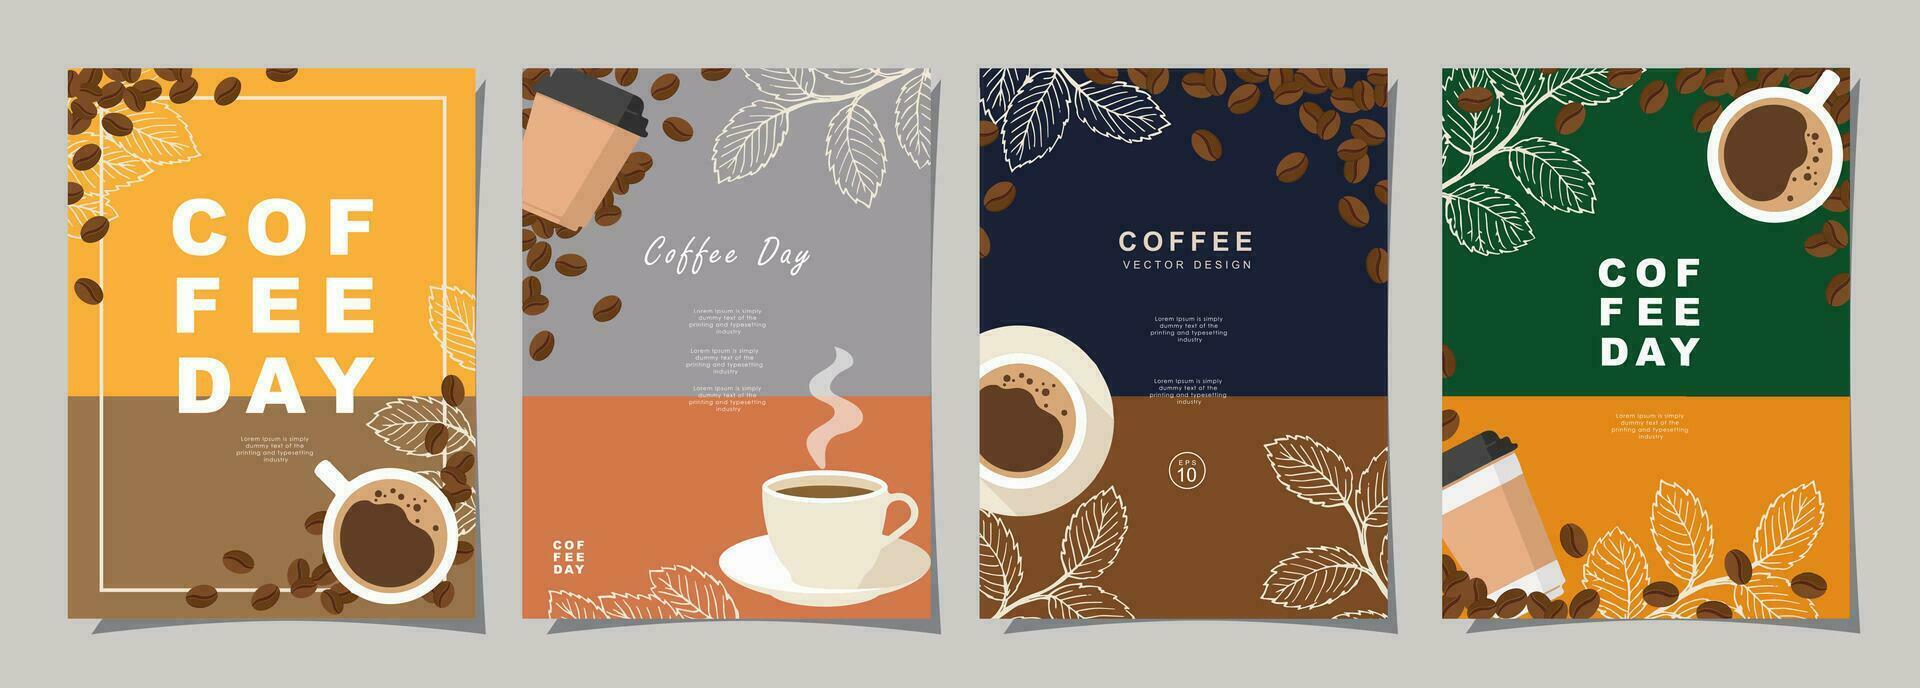 Set of sketch banners with coffee beans and leaves on colorful background for poster, menu, cafe or another template design. Coffee Day. vector illustration.